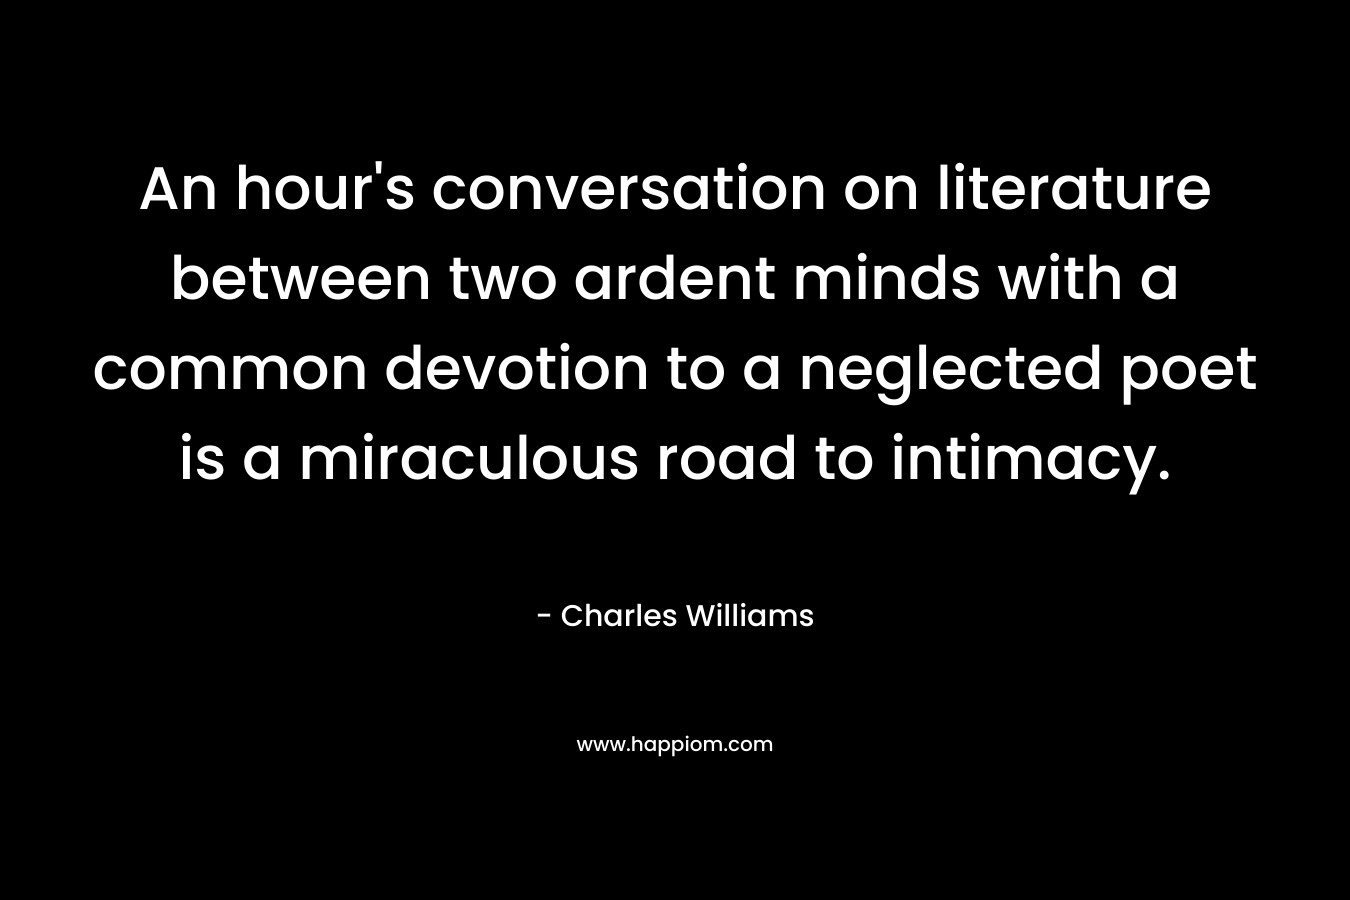 An hour’s conversation on literature between two ardent minds with a common devotion to a neglected poet is a miraculous road to intimacy. – Charles Williams